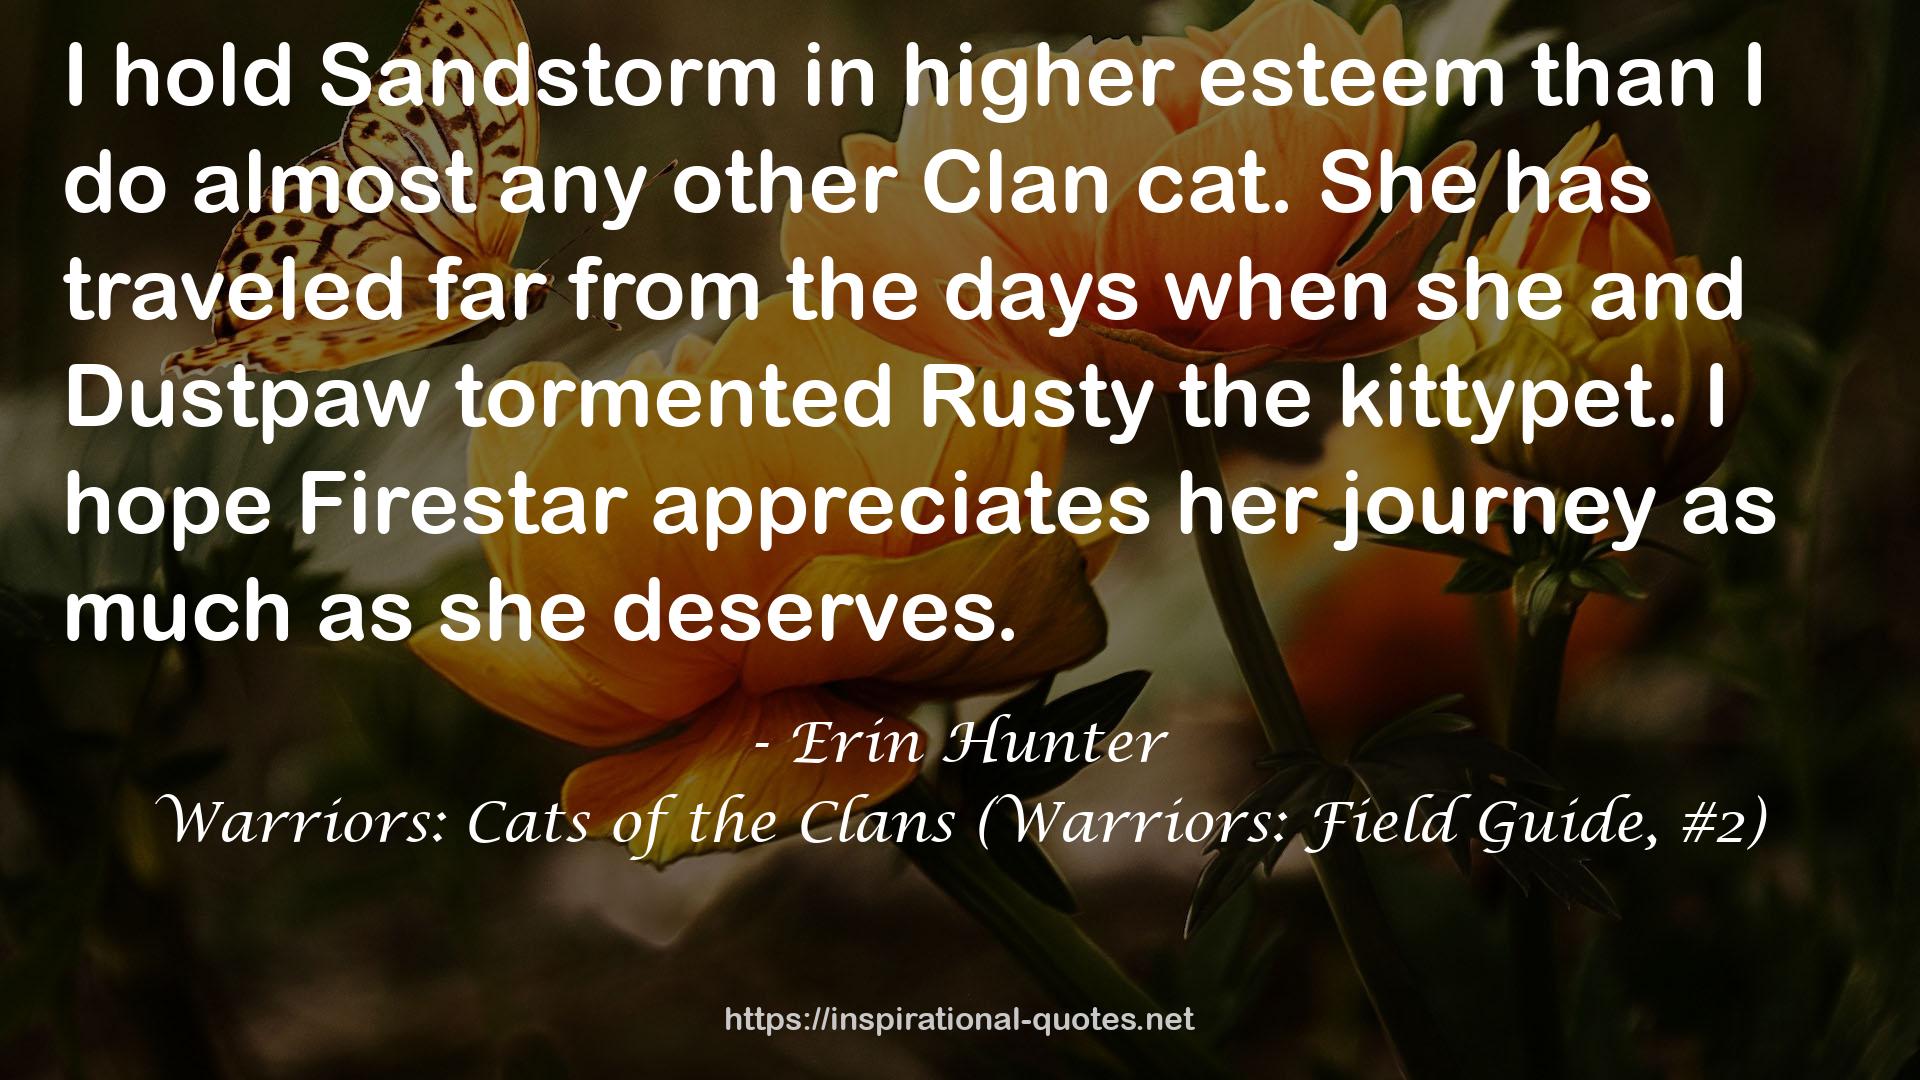 Warriors: Cats of the Clans (Warriors: Field Guide, #2) QUOTES